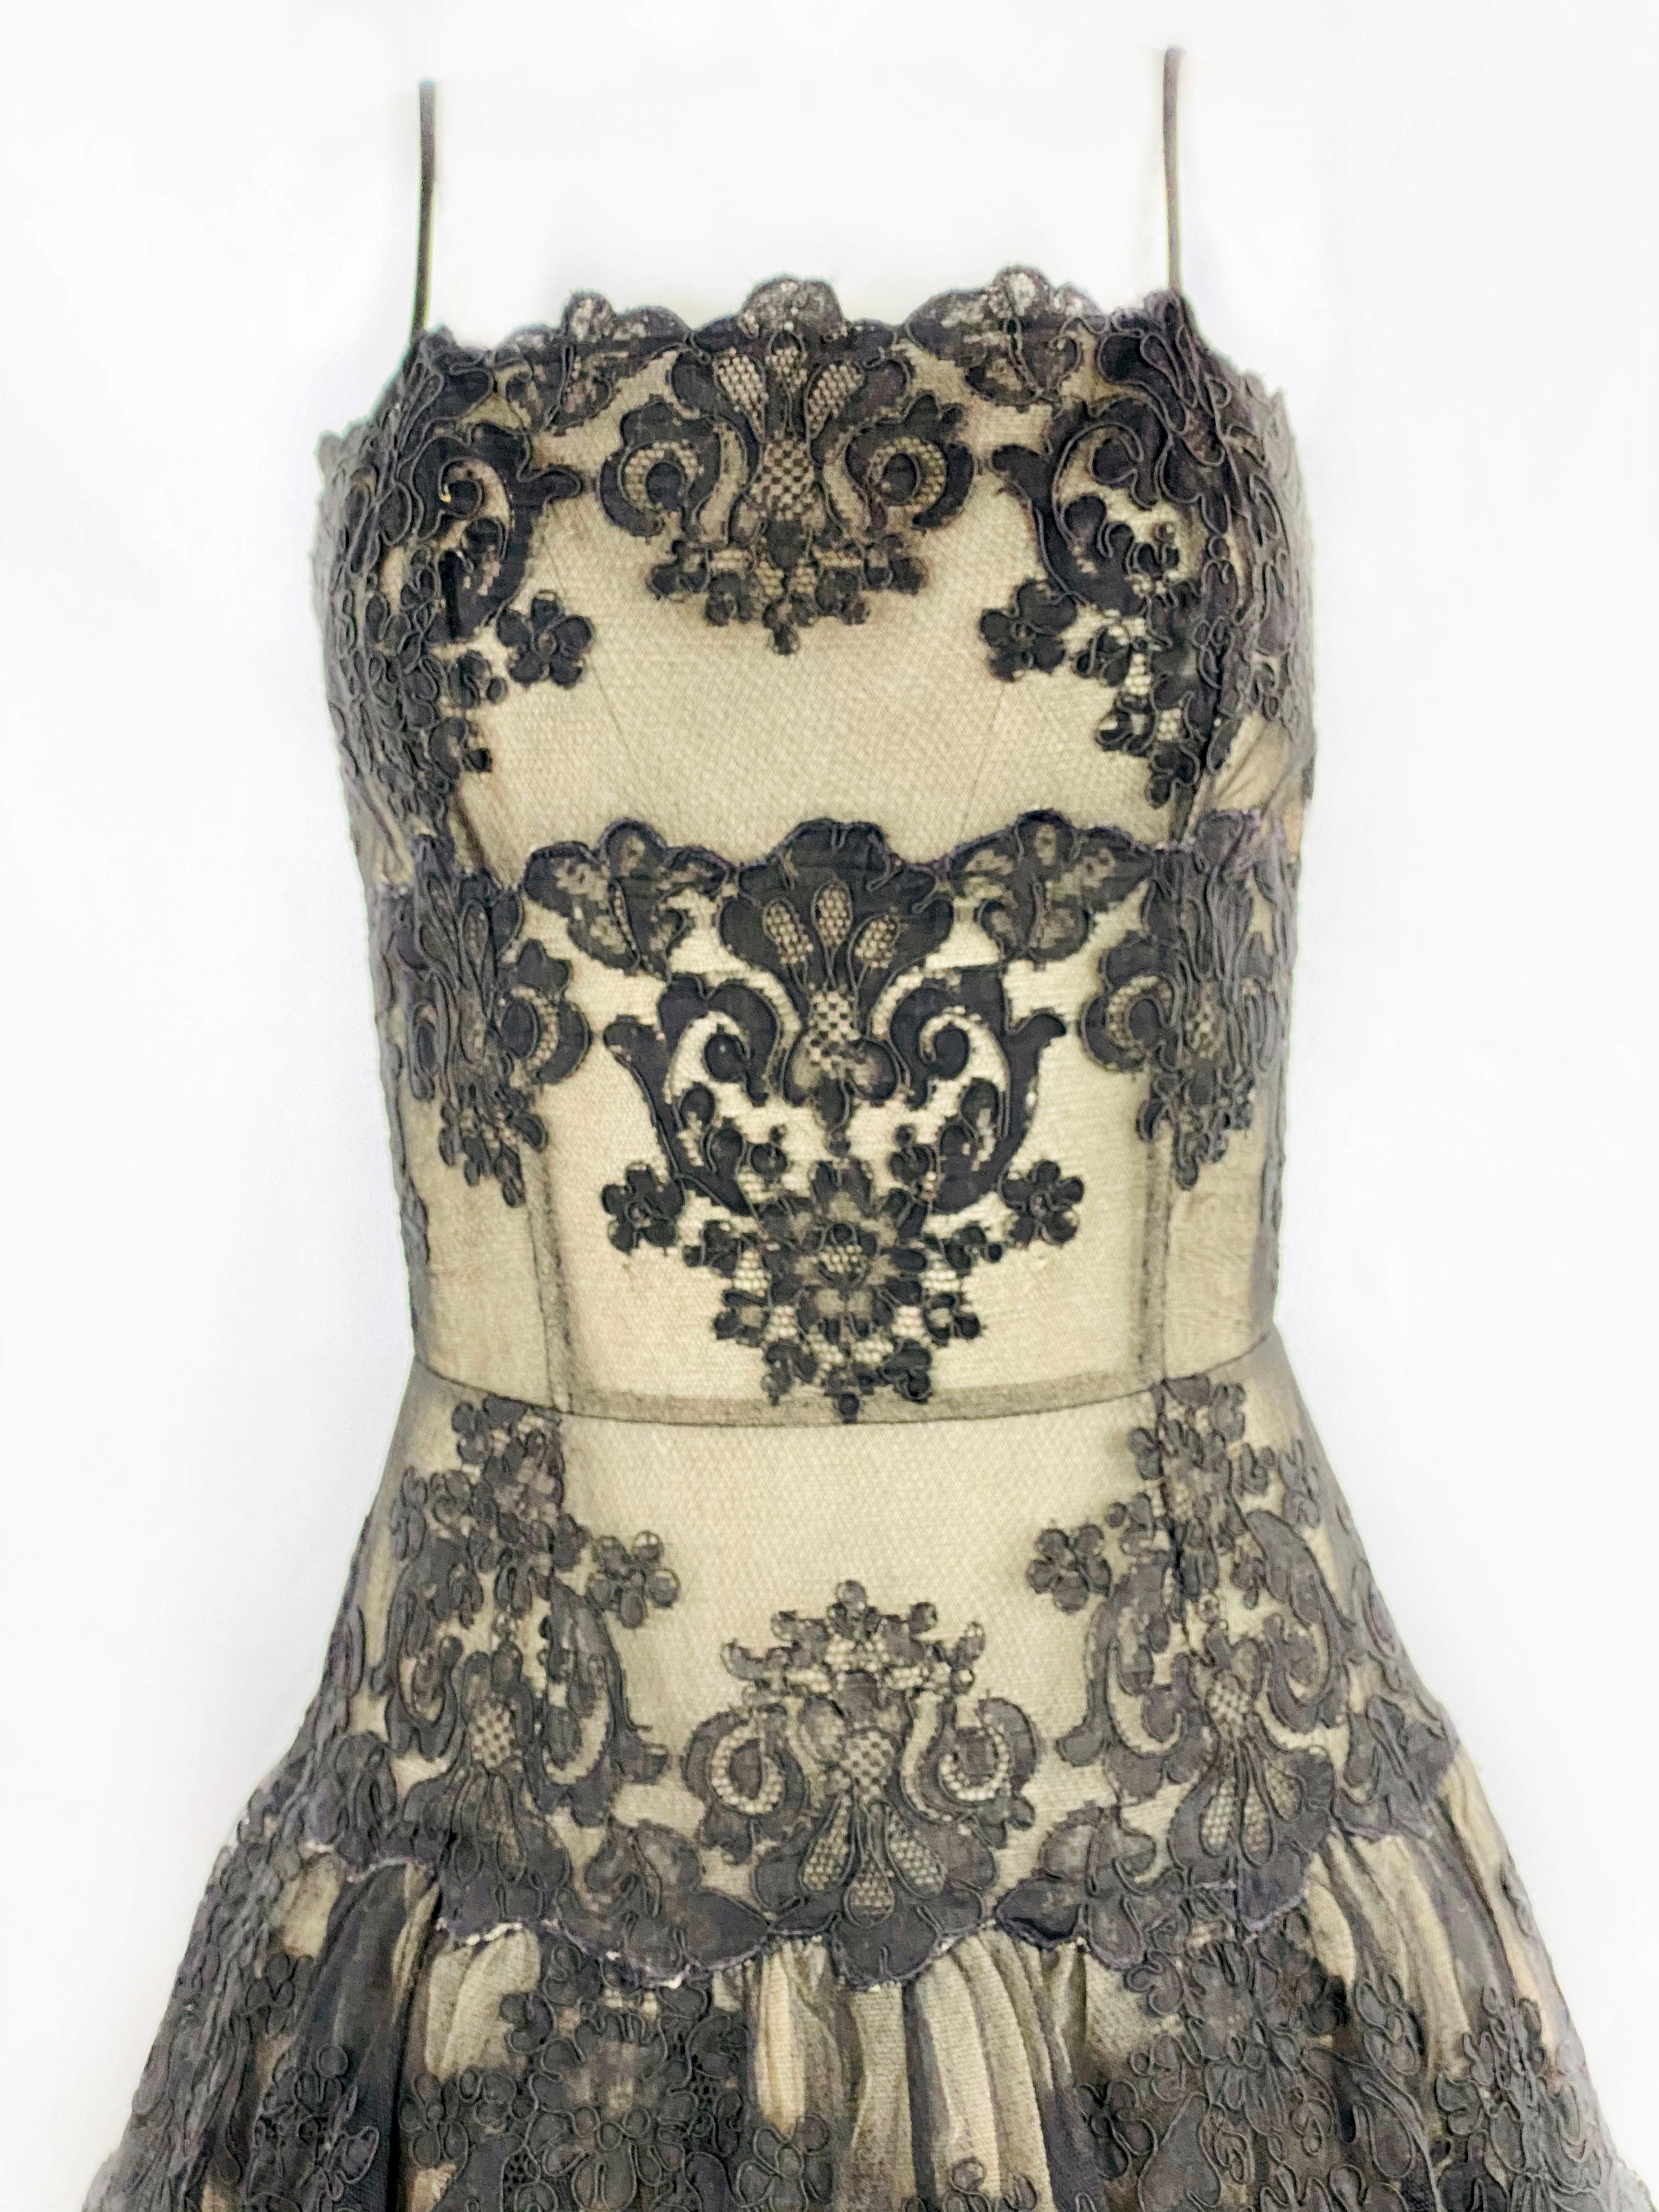 Vintage VICKY TIEL Couture Paris Black Floral Lace Sleeveless Mini Dress Size S

Product details:
Size S
Black and beige floral lace 
Noodle strap drop measures 5”
Rear zip closure measures 15.5”
Five layers skirt
Made in France 
